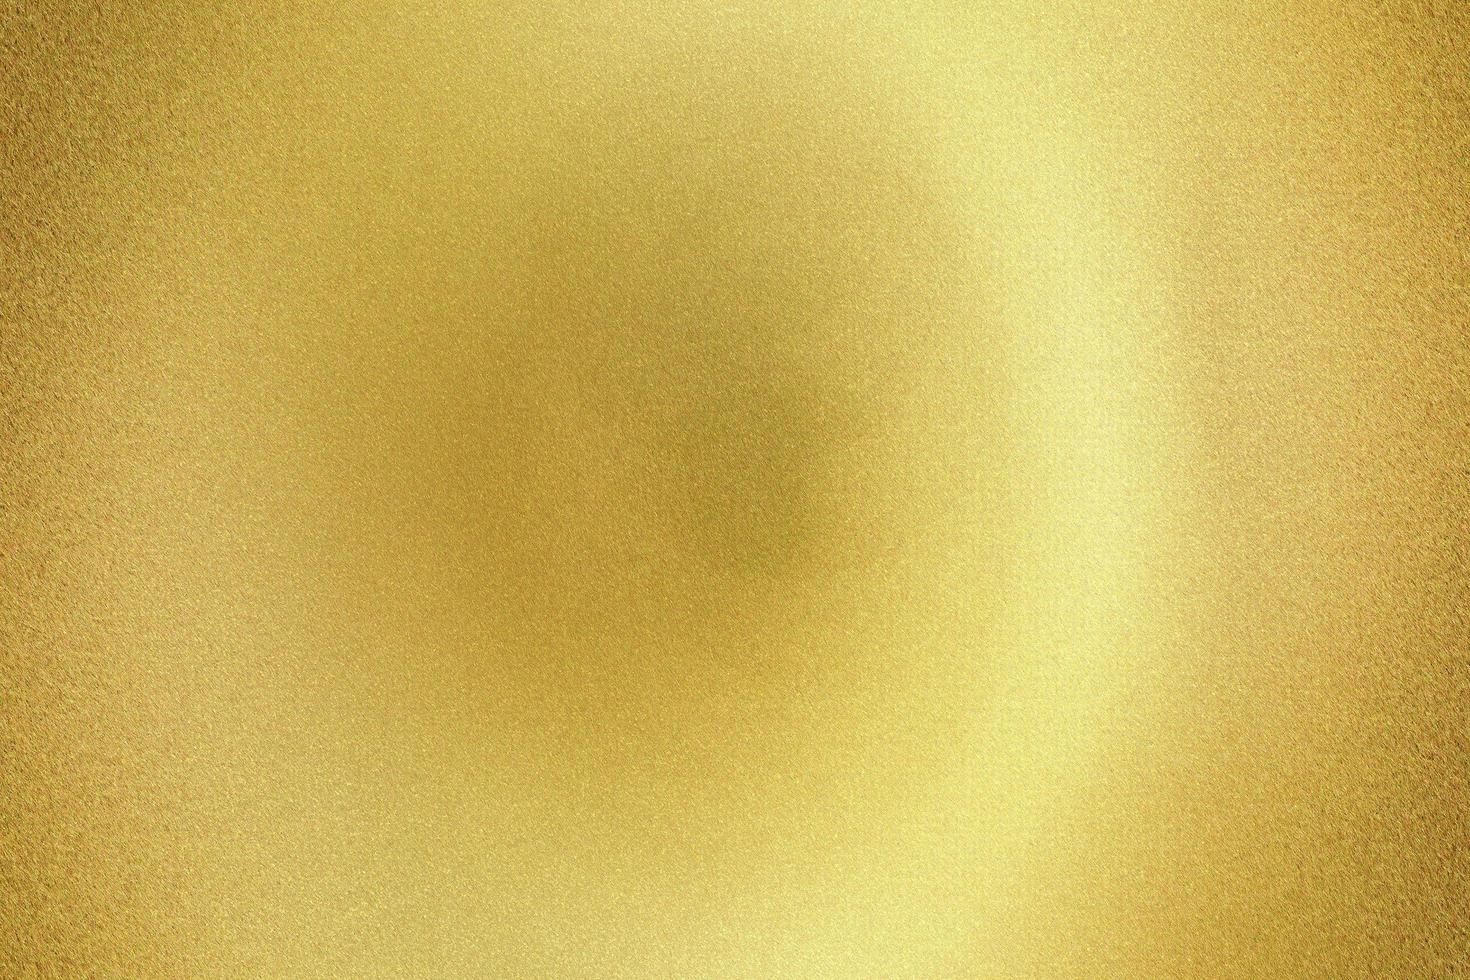 Light shining on gold rough metal sheet board , abstract texture background photo